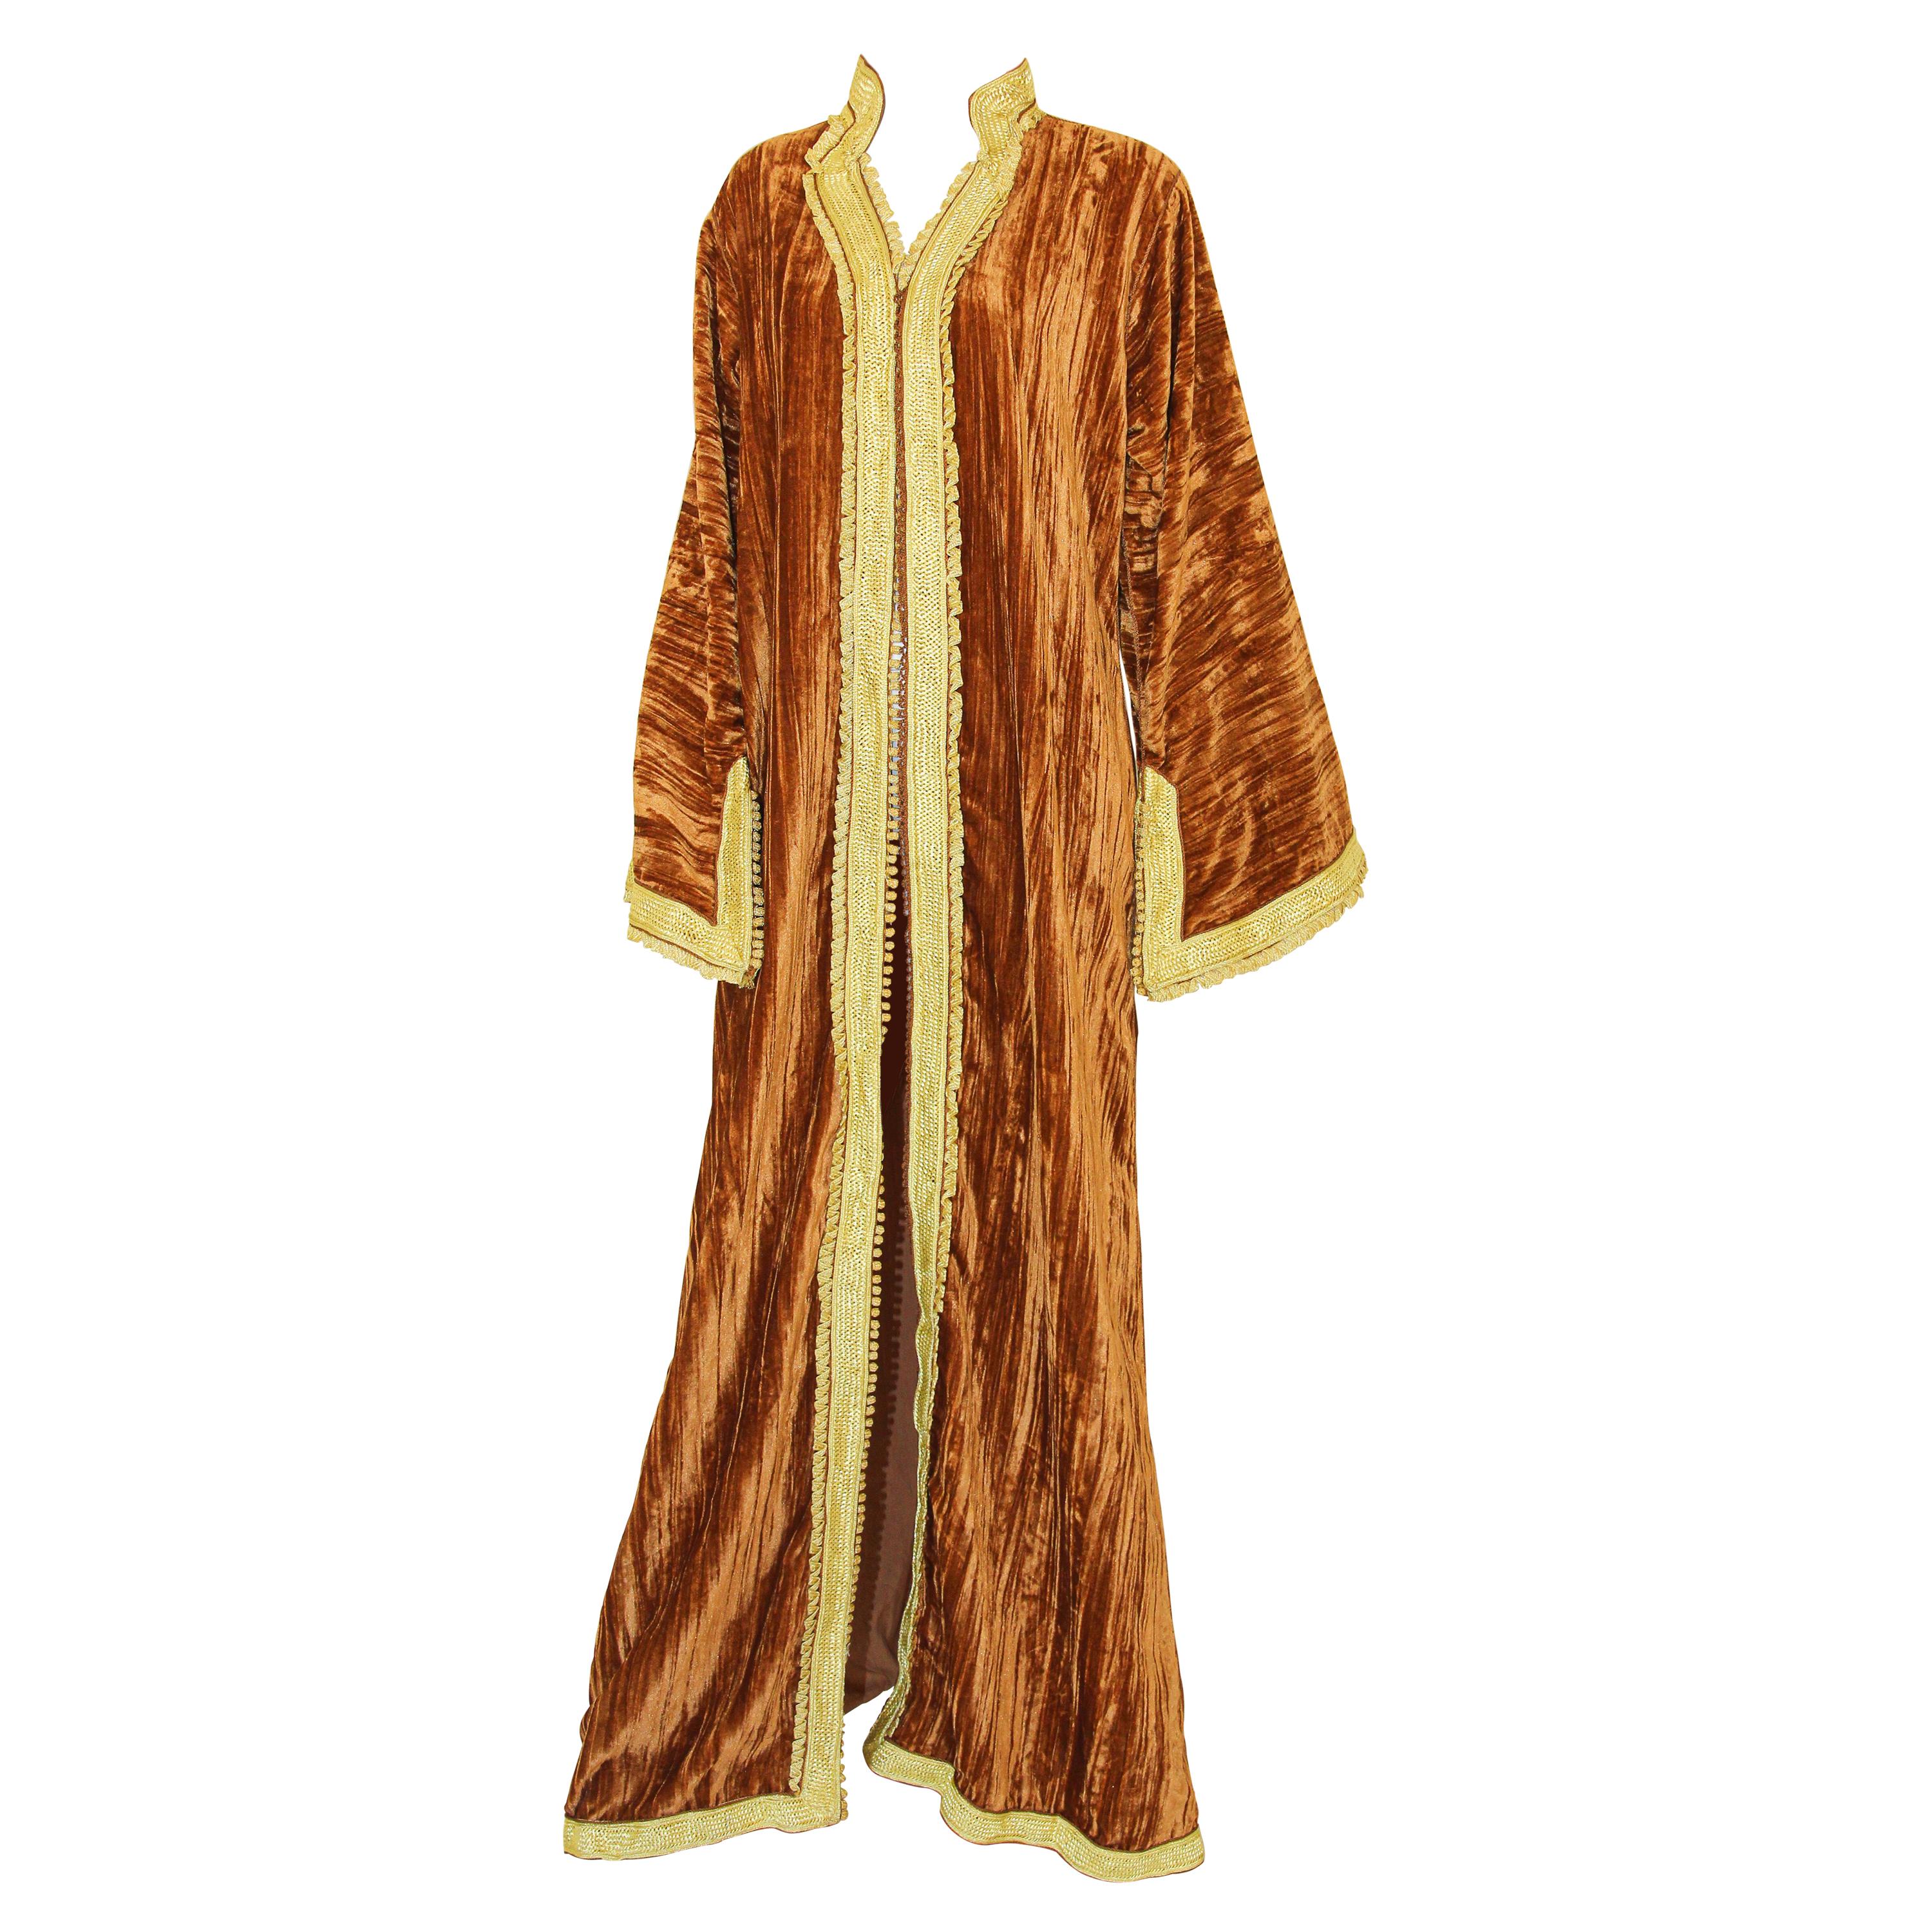 Amazing Vintage Caftan, Caramel Velvet and Gold Embroidered, ca. 1960s For Sale